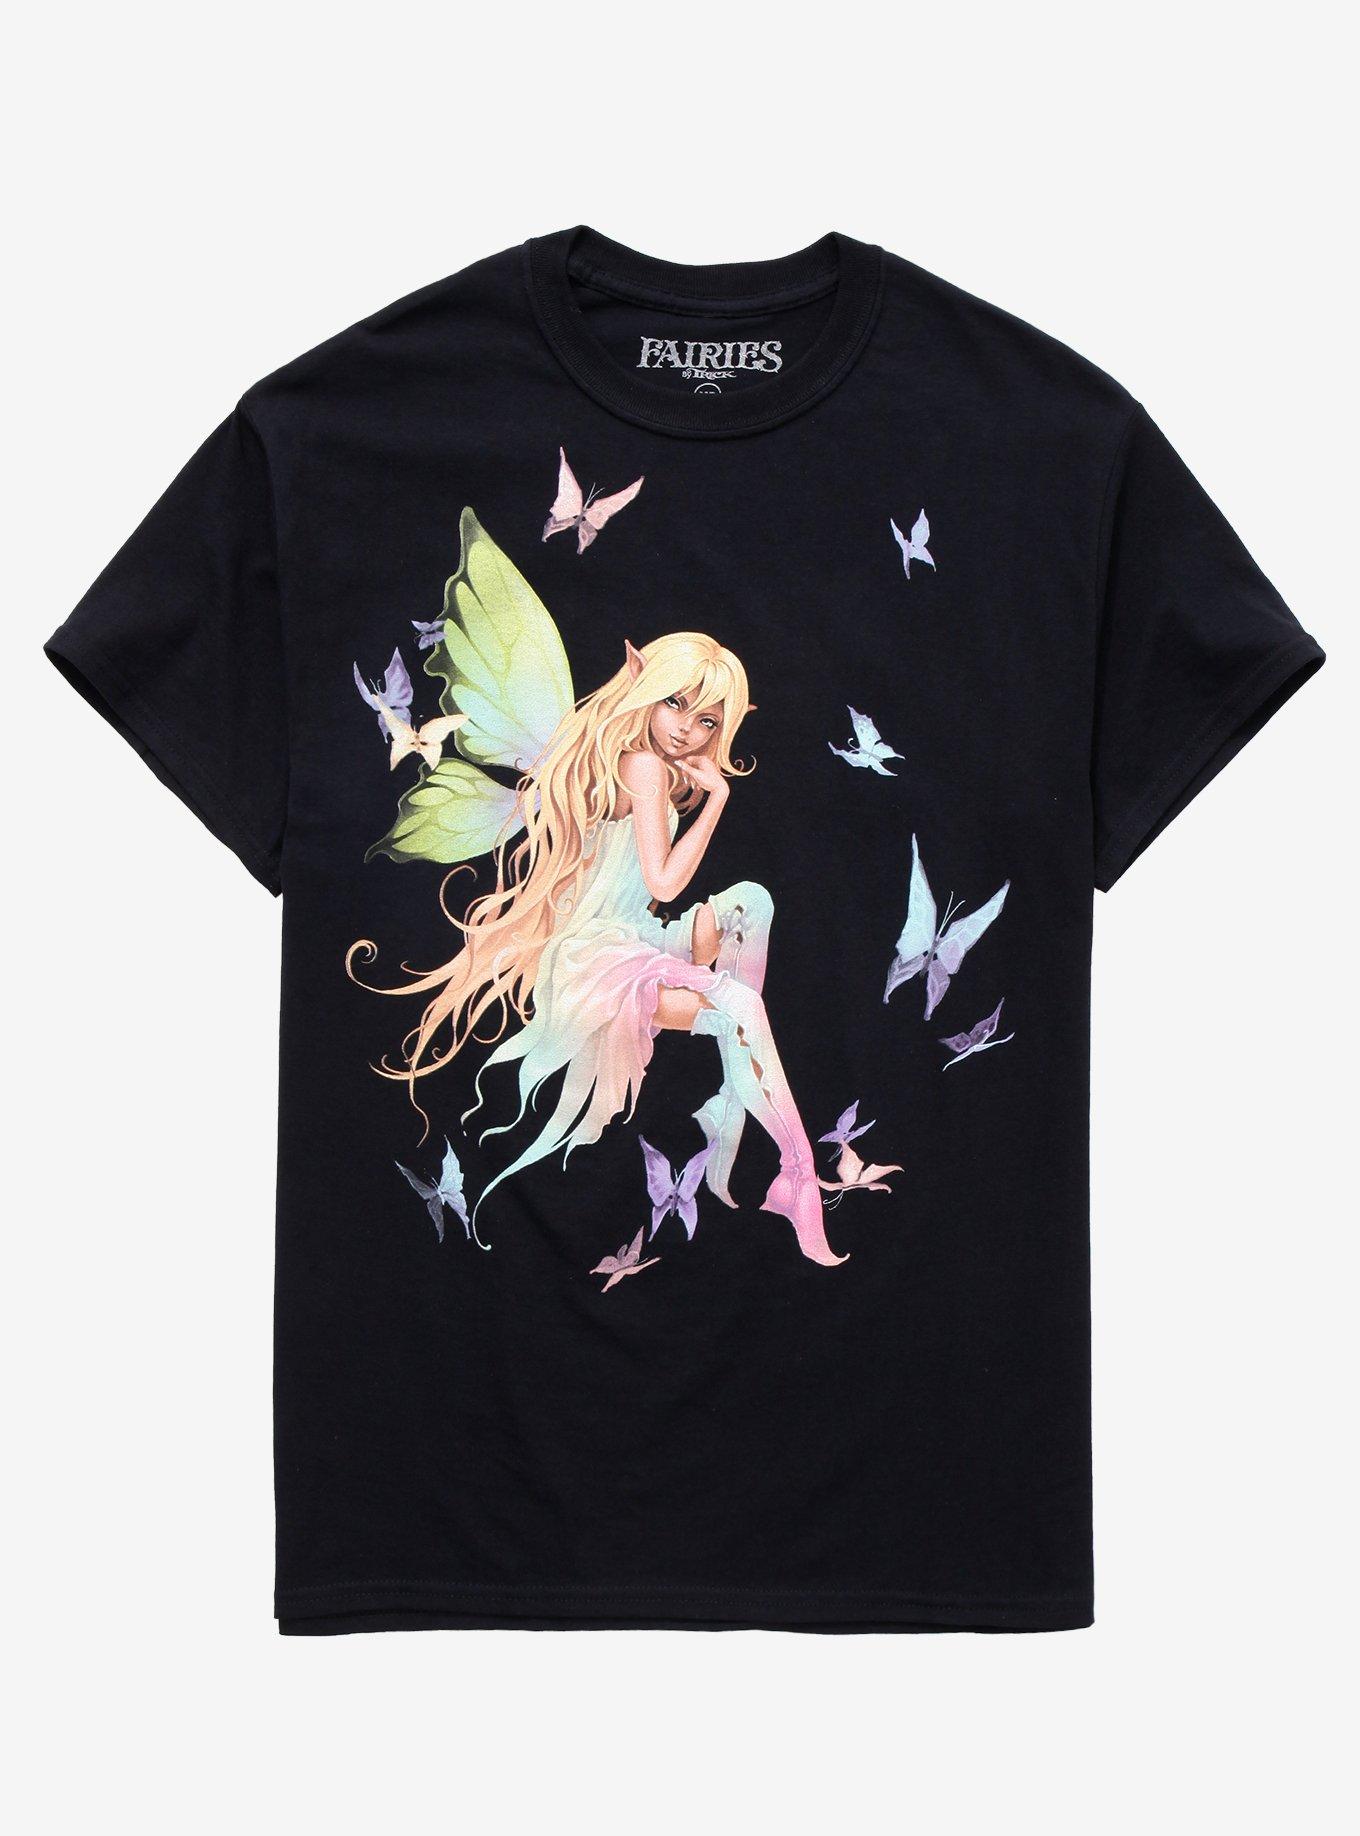 Hot Butterfly Trick T-Shirt | Fairies Fairy Girls By Boyfriend Topic Pastel Fit